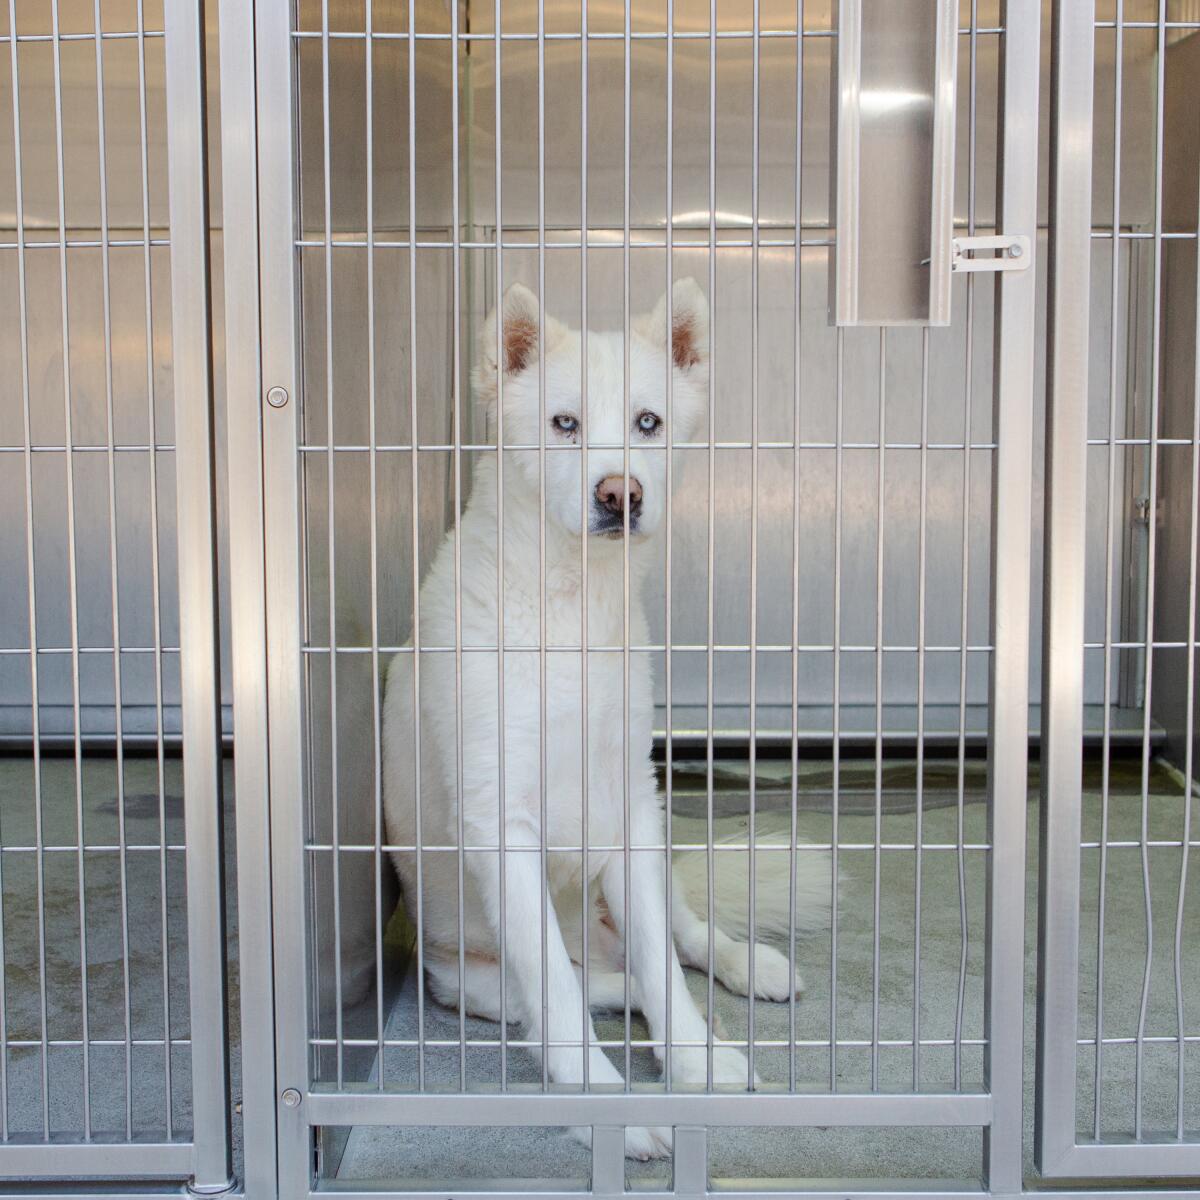 White dog in a kennel